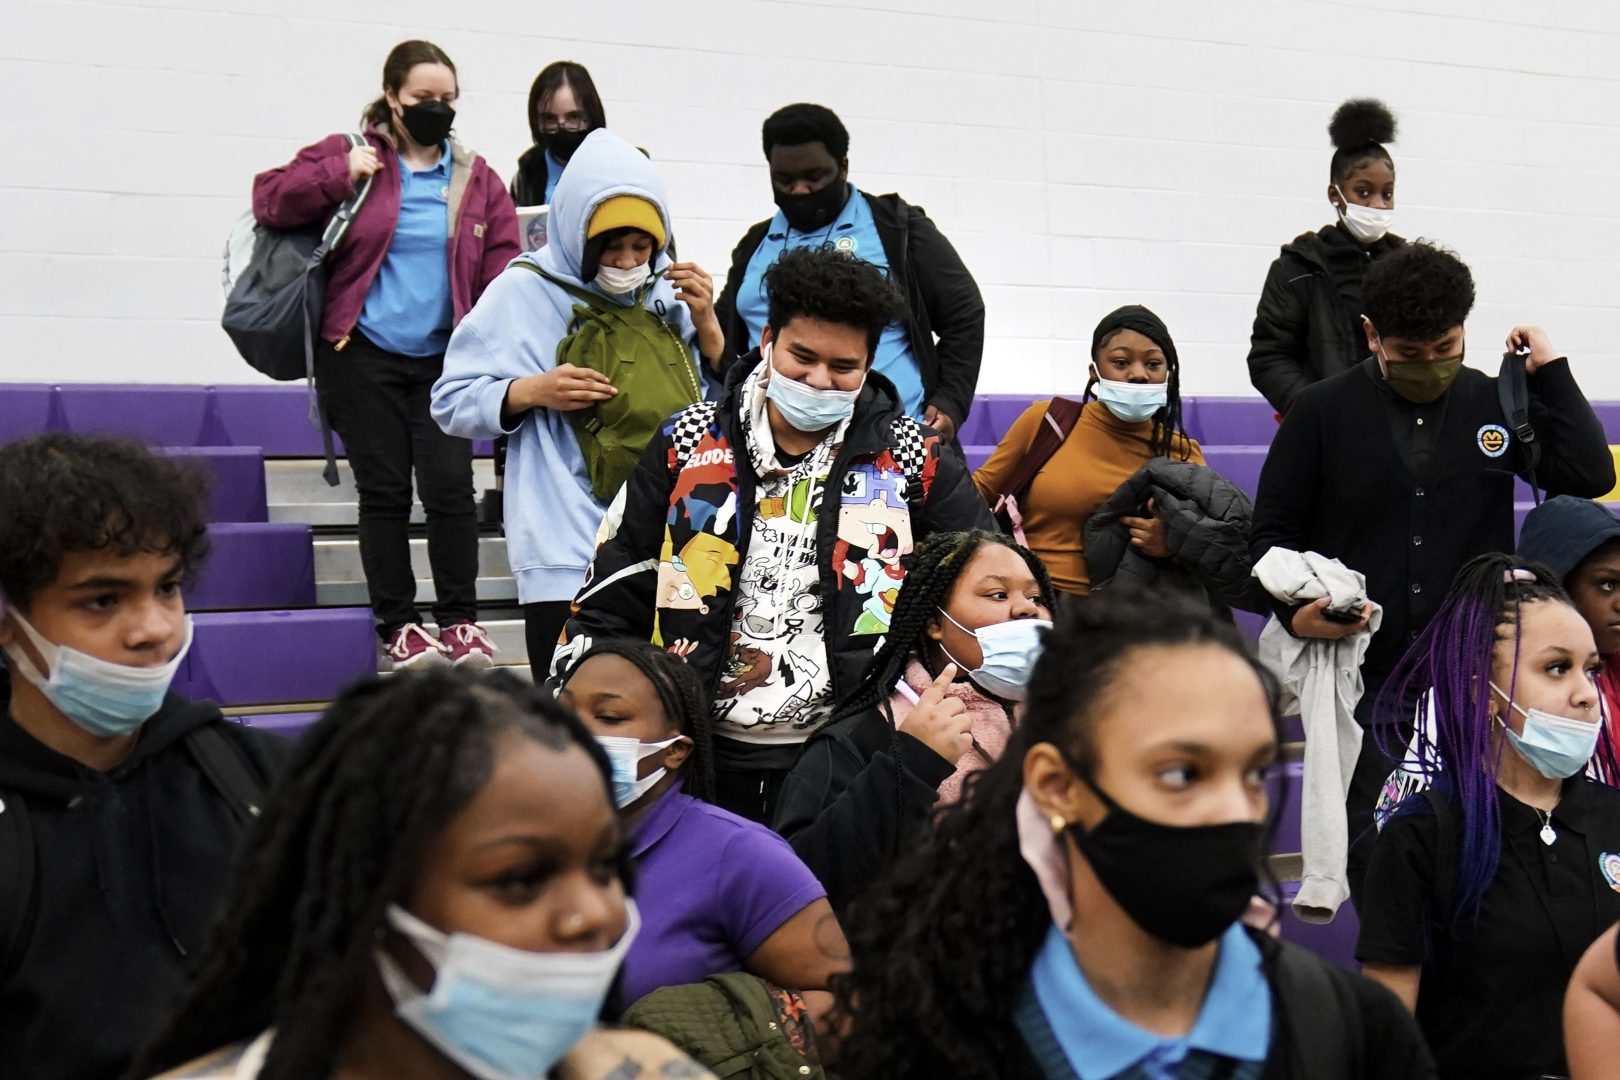 Students wearing mask as a precaution against the spread of the coronavirus line up to receive KN95 protective masks at Camden High School in Camden, N.J., Feb. 9, 2022.  